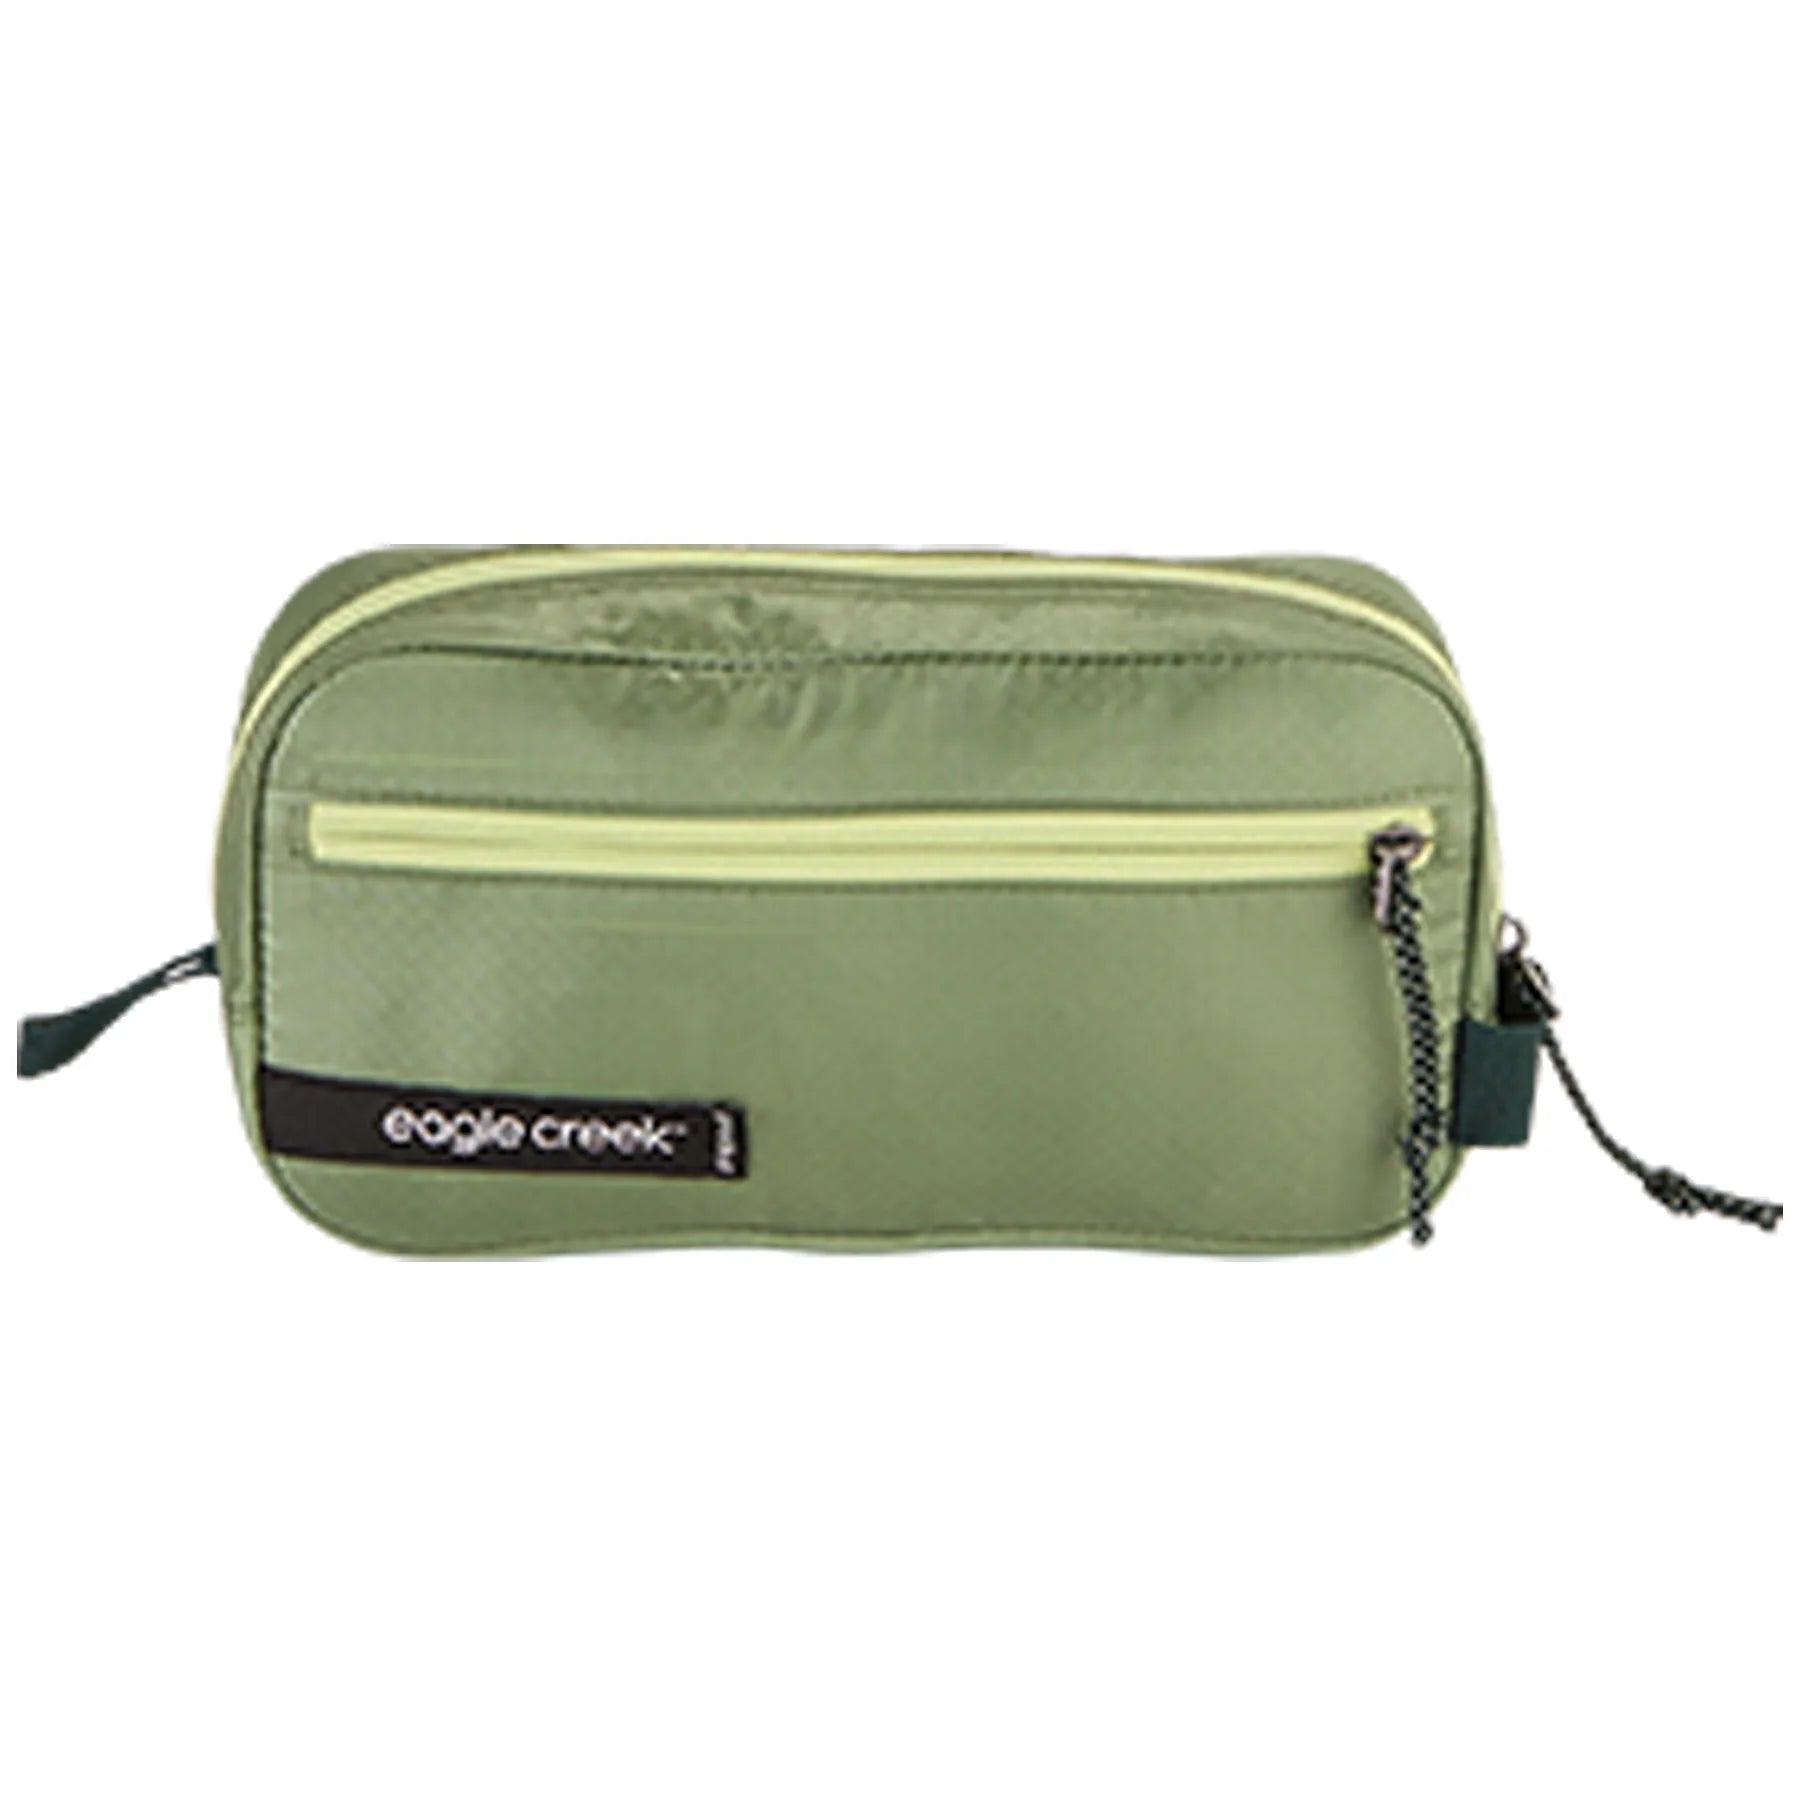 Eagle Creek Pack-It Isolate Quick Trip Toiletry Bag XS 20 cm - mossy green